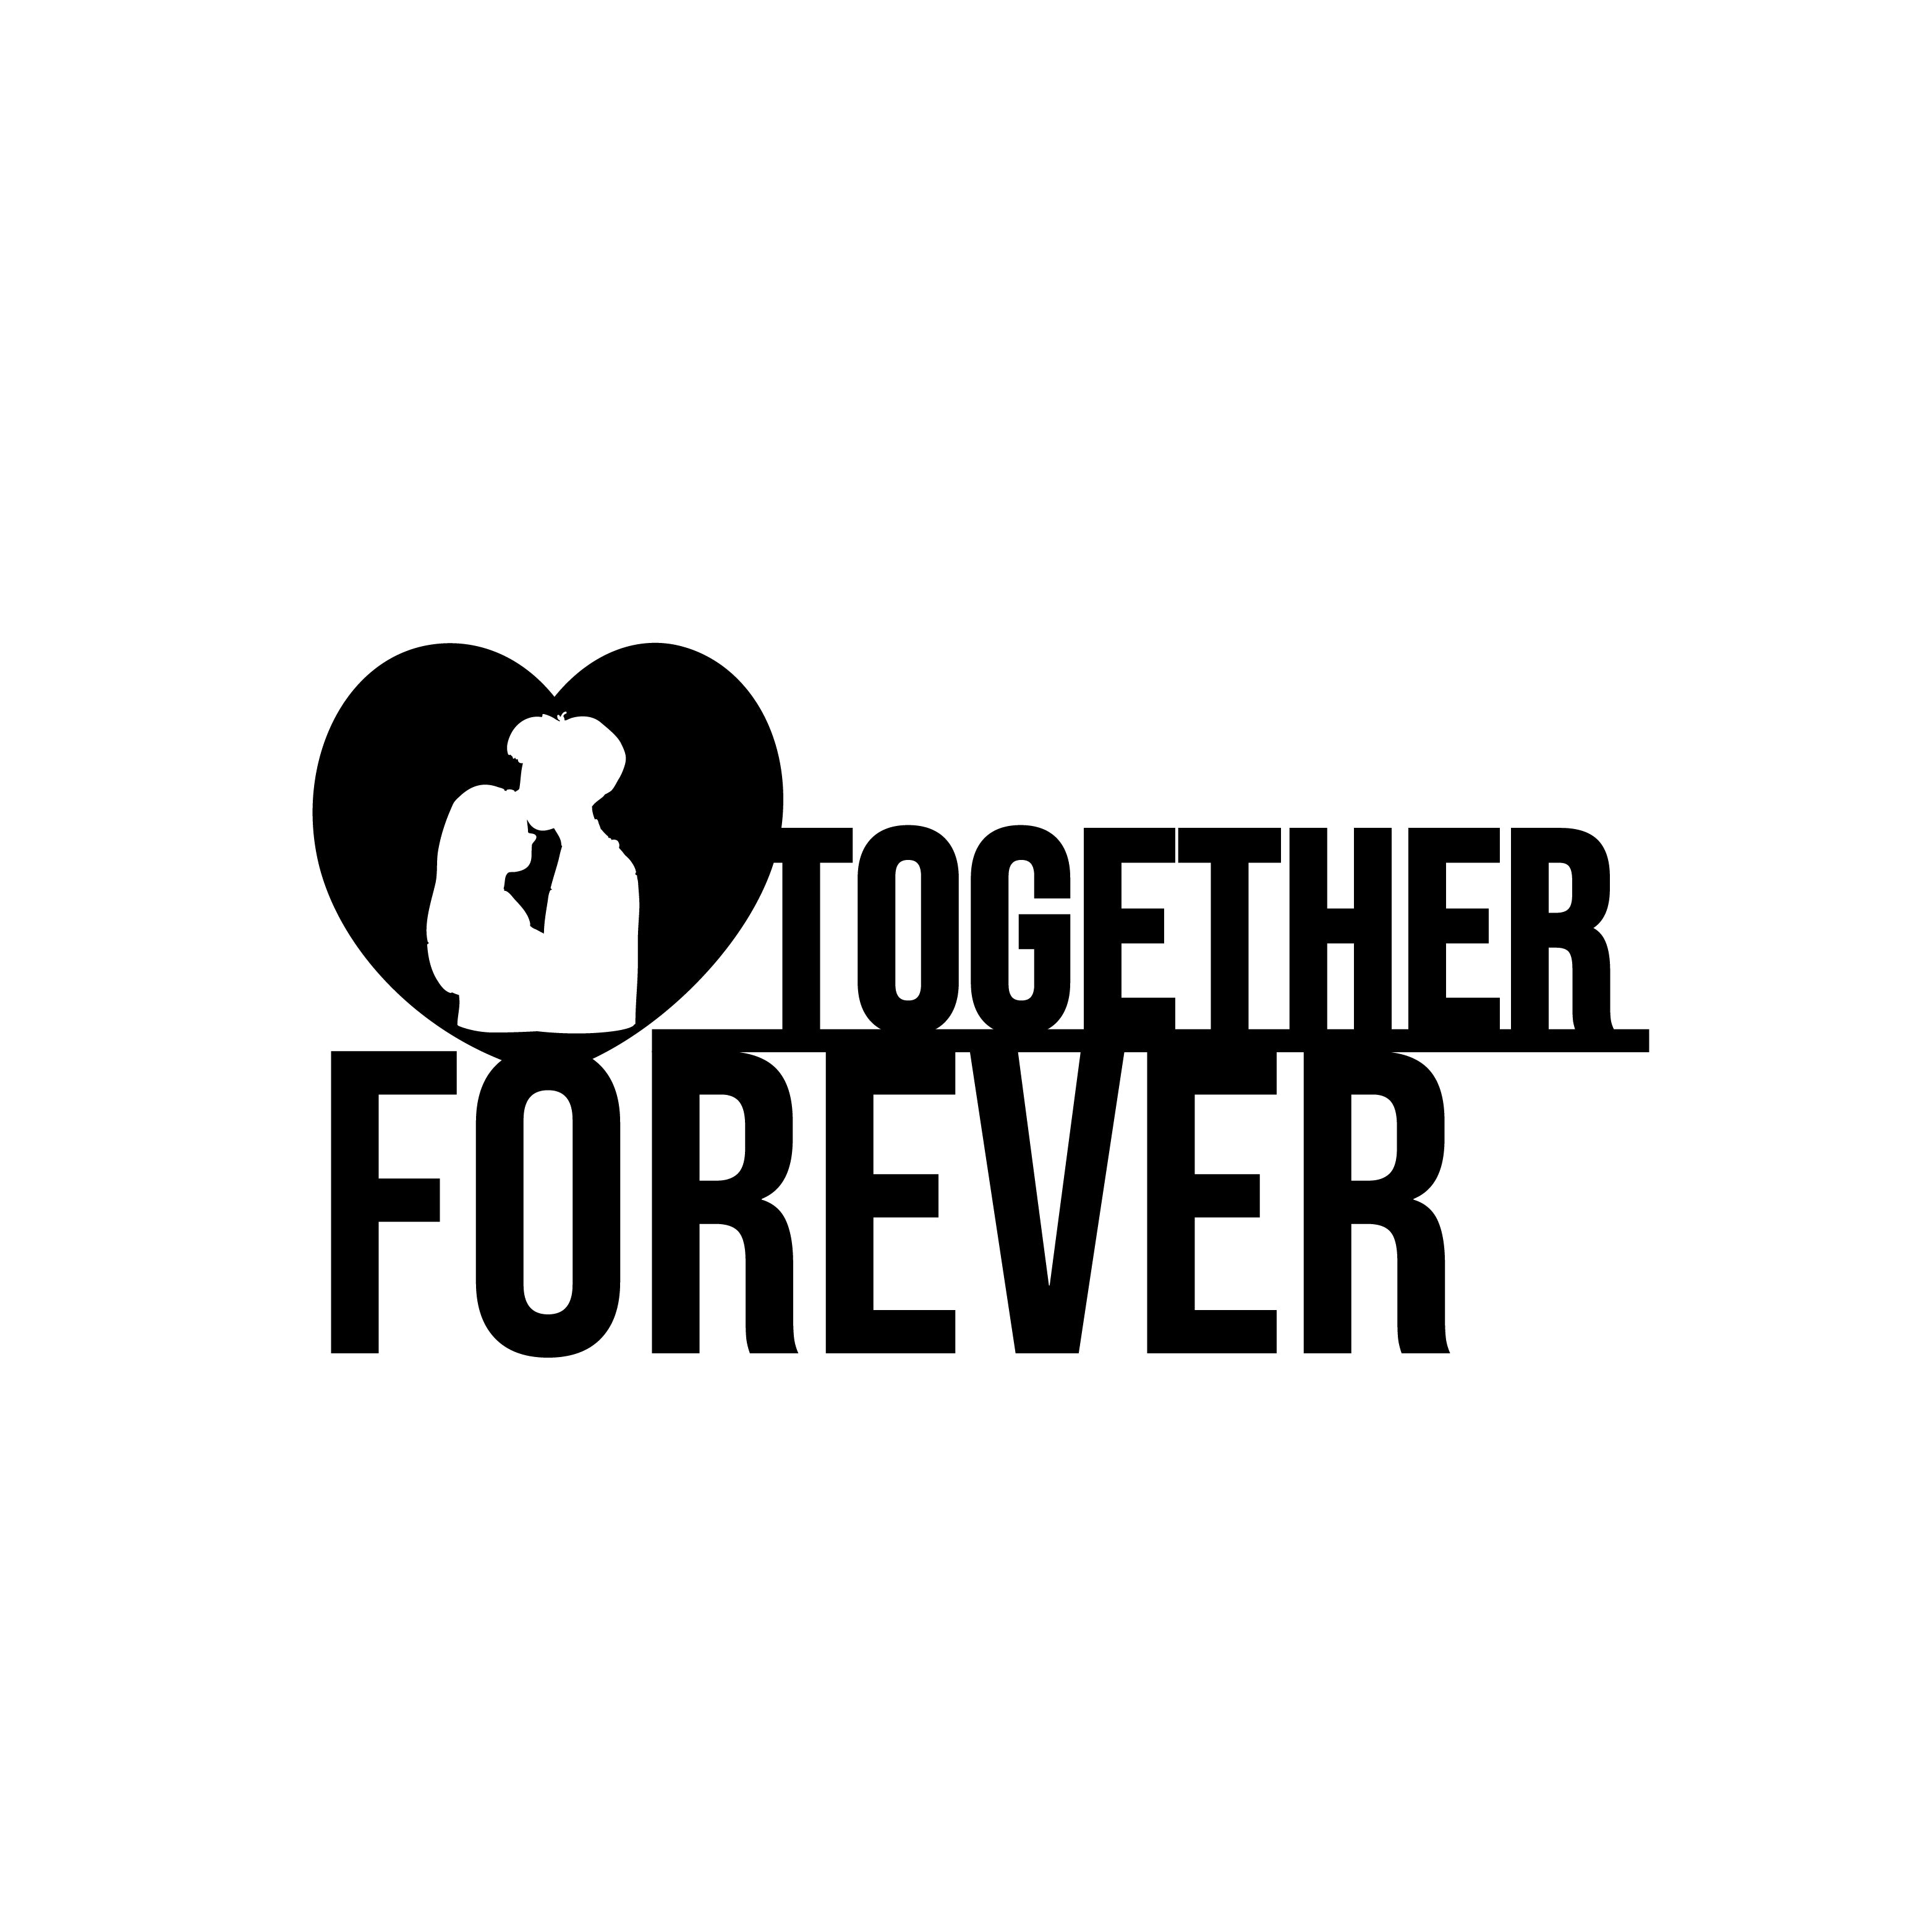 "Together Forever" Black Engineered Wood Wall Art Cutout, Ready to Hang Home Decor 2